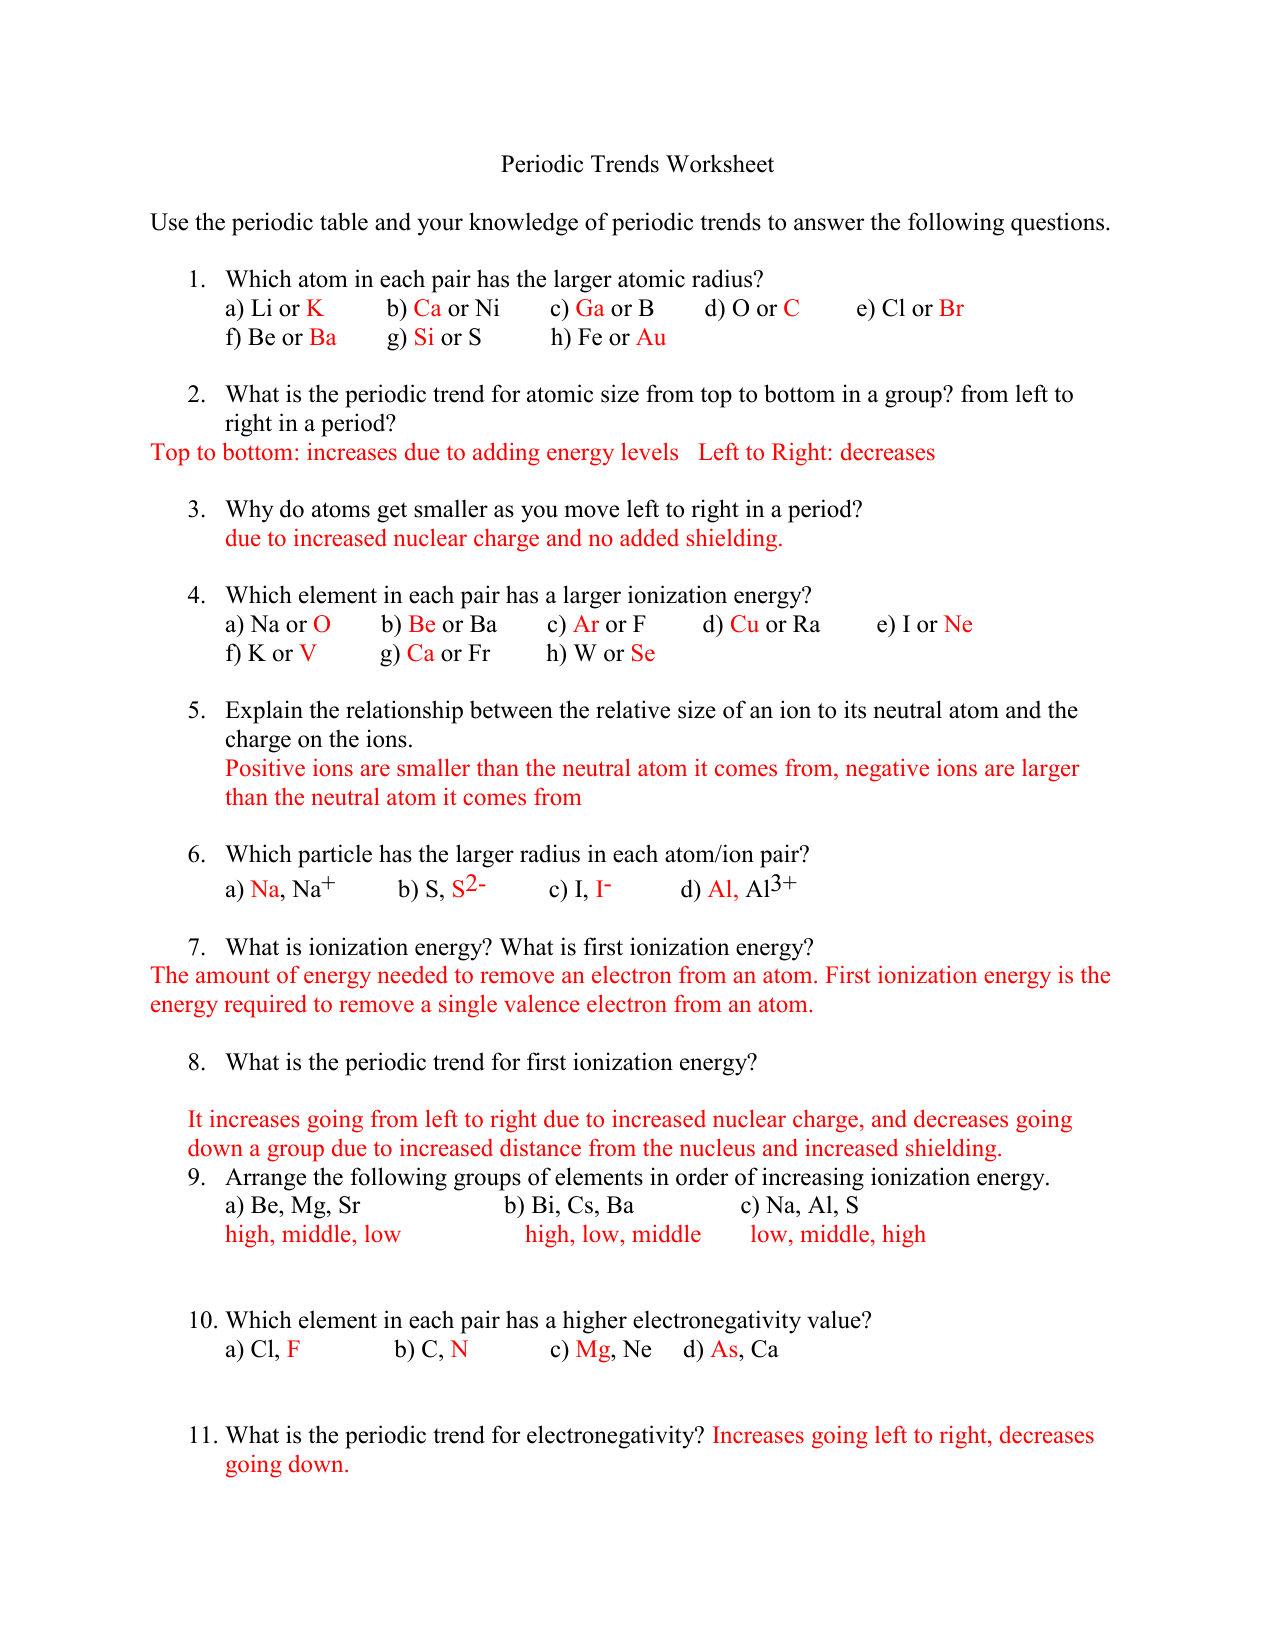 Periodic Trends Worksheet 23 answers With Periodic Trends Worksheet Answer Key